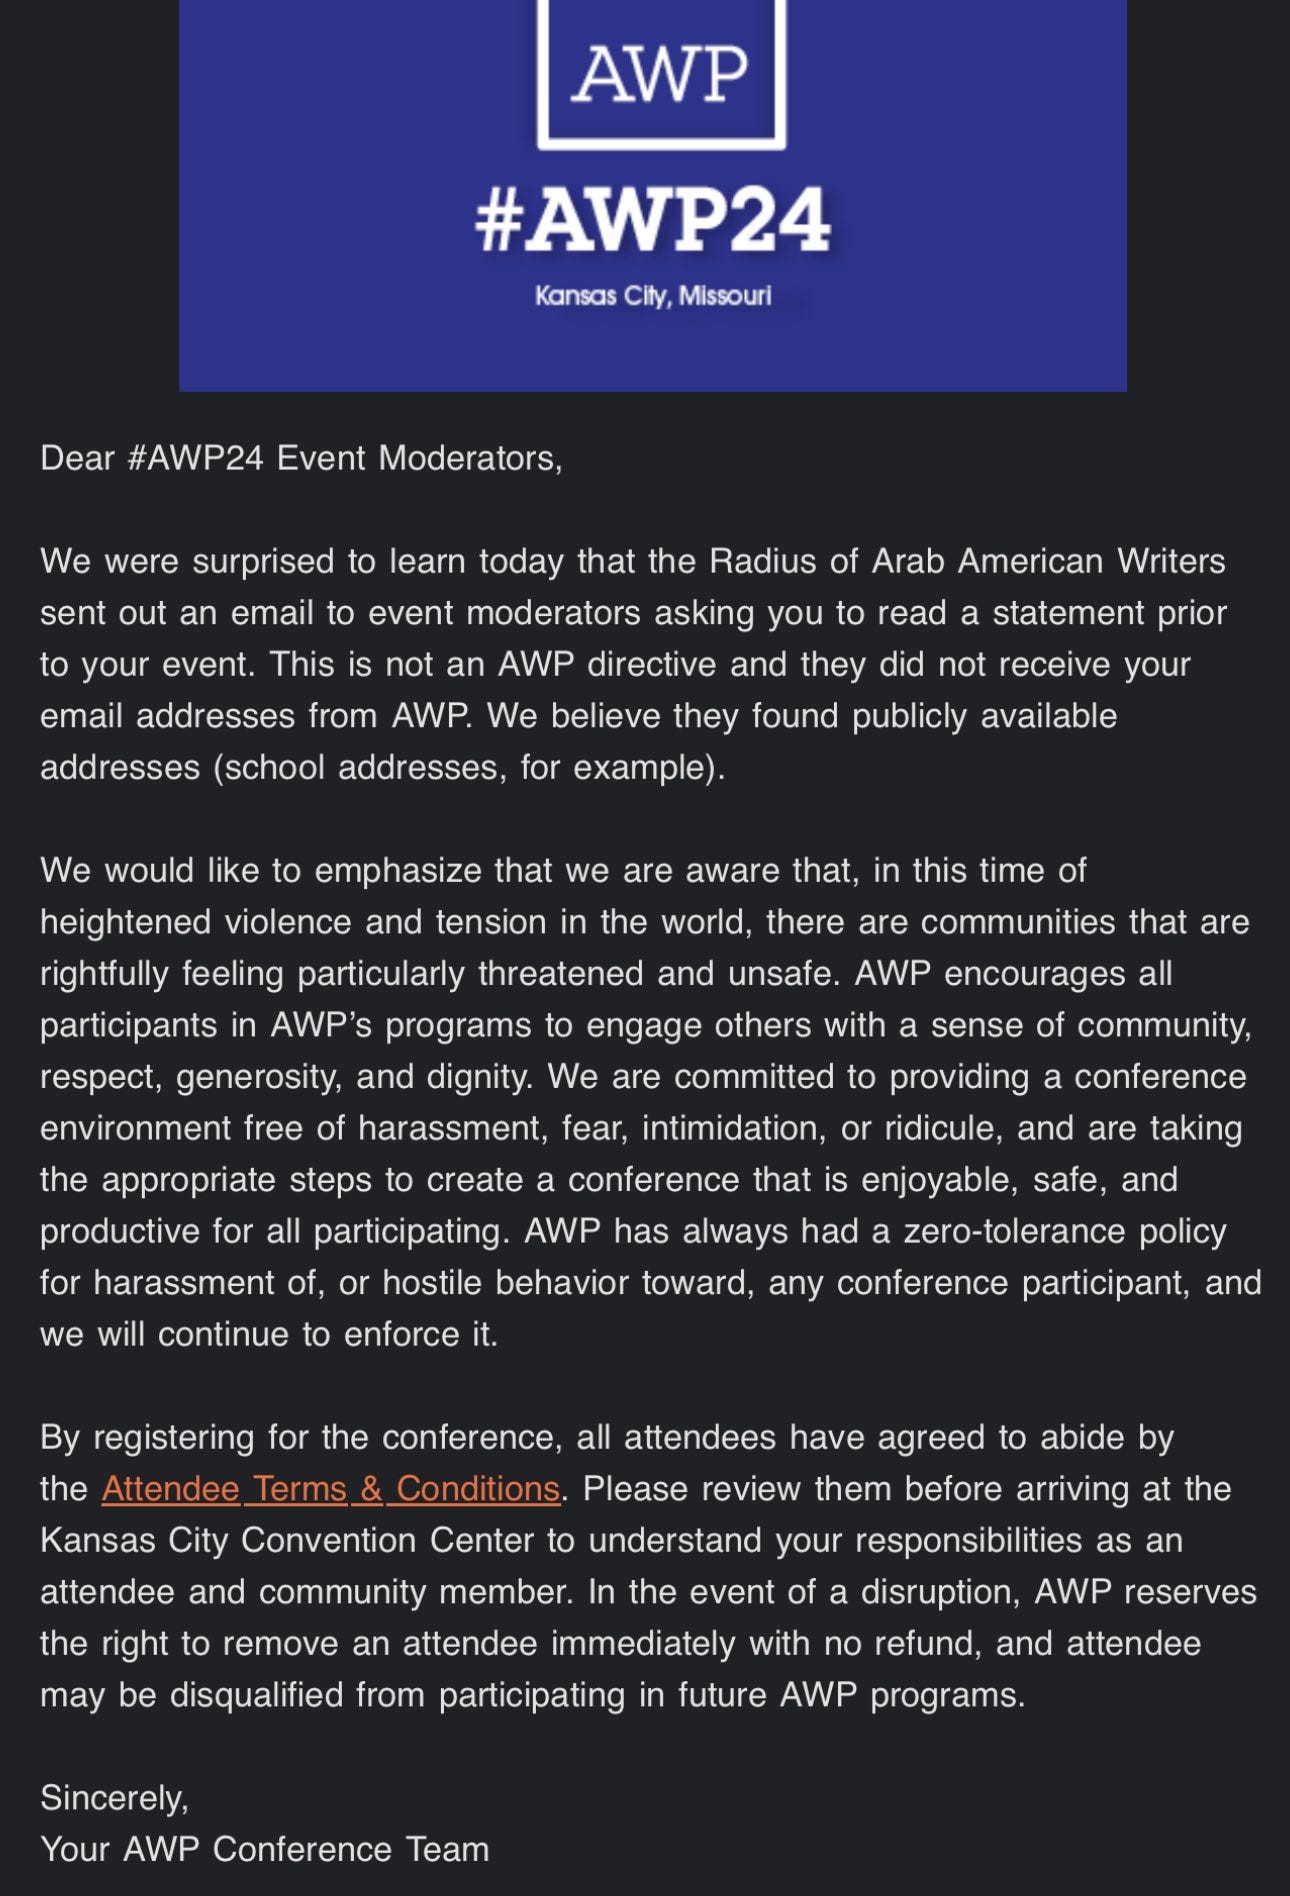 AWPs statement in response. It can be found on AWP's Twitter feed, but I'm no longer on Twitter because of all the damn Nazis, so can't point you to it directly. 